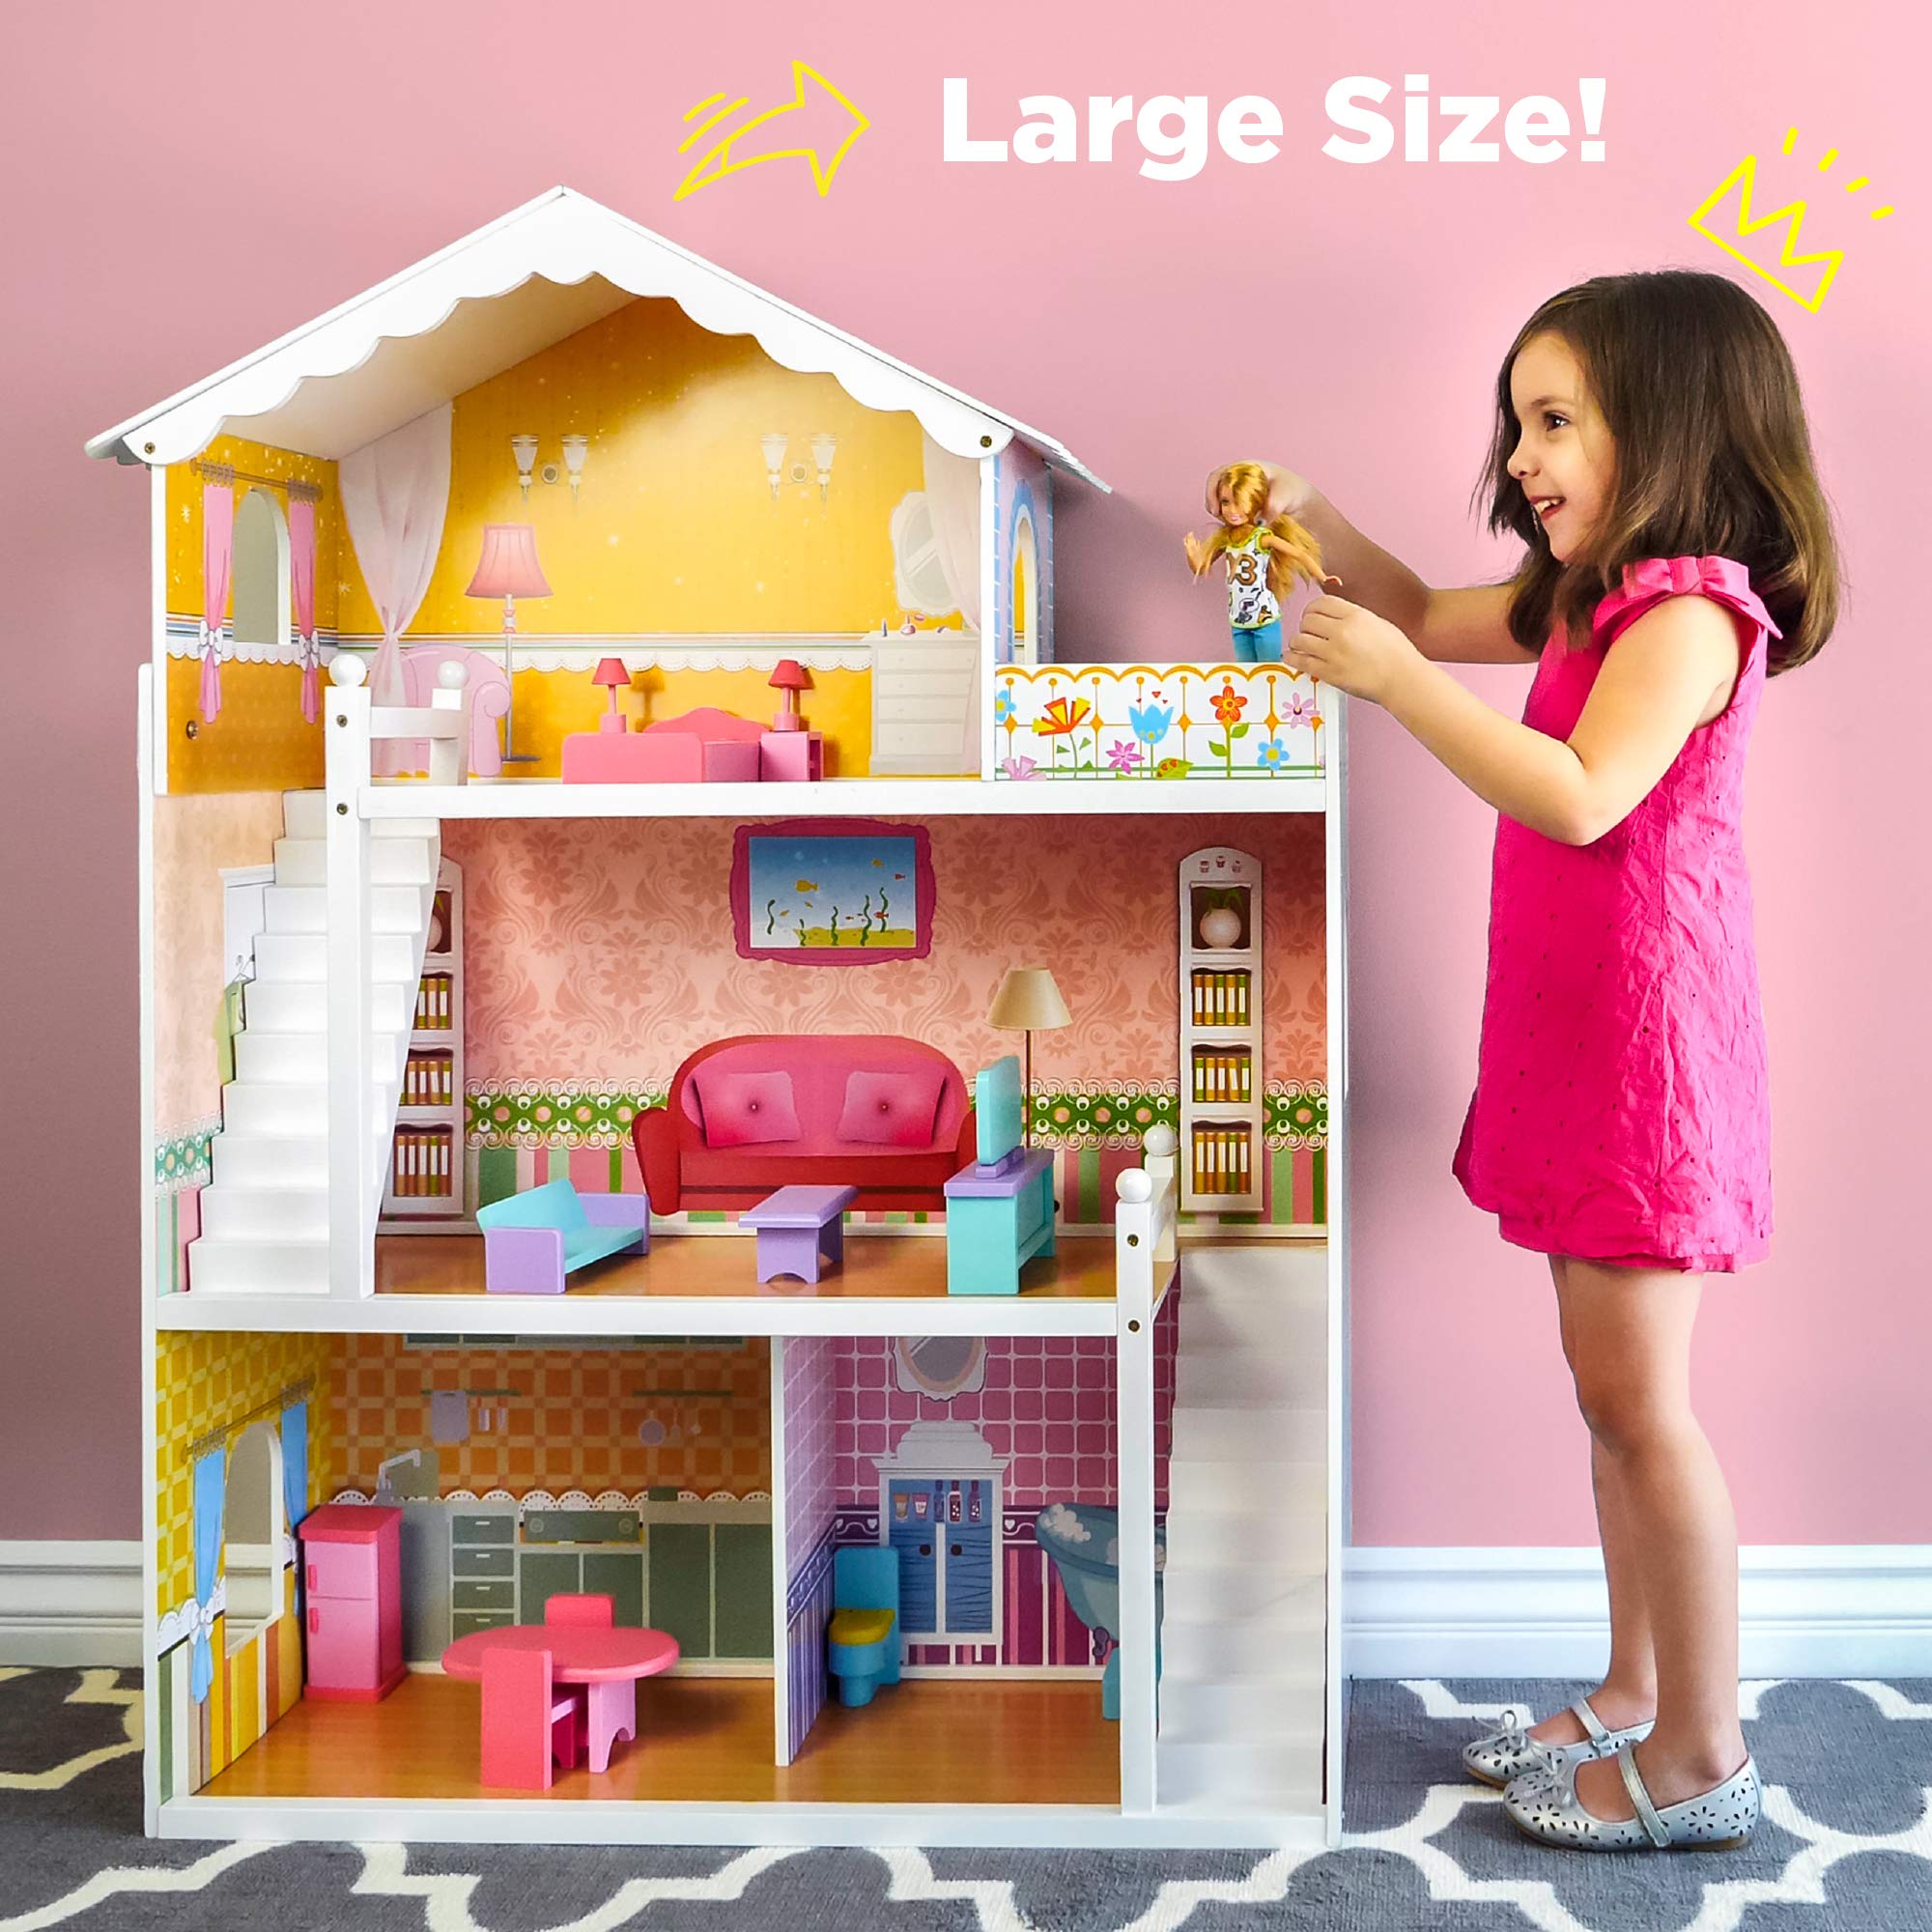 Best Choice Products 44in 3-Story Wood Dollhouse Mansion Playset, Large Open Pretend Play w/ 5 Colorful Rooms, 17 Furniture Pieces, Compatible w/Major Brands